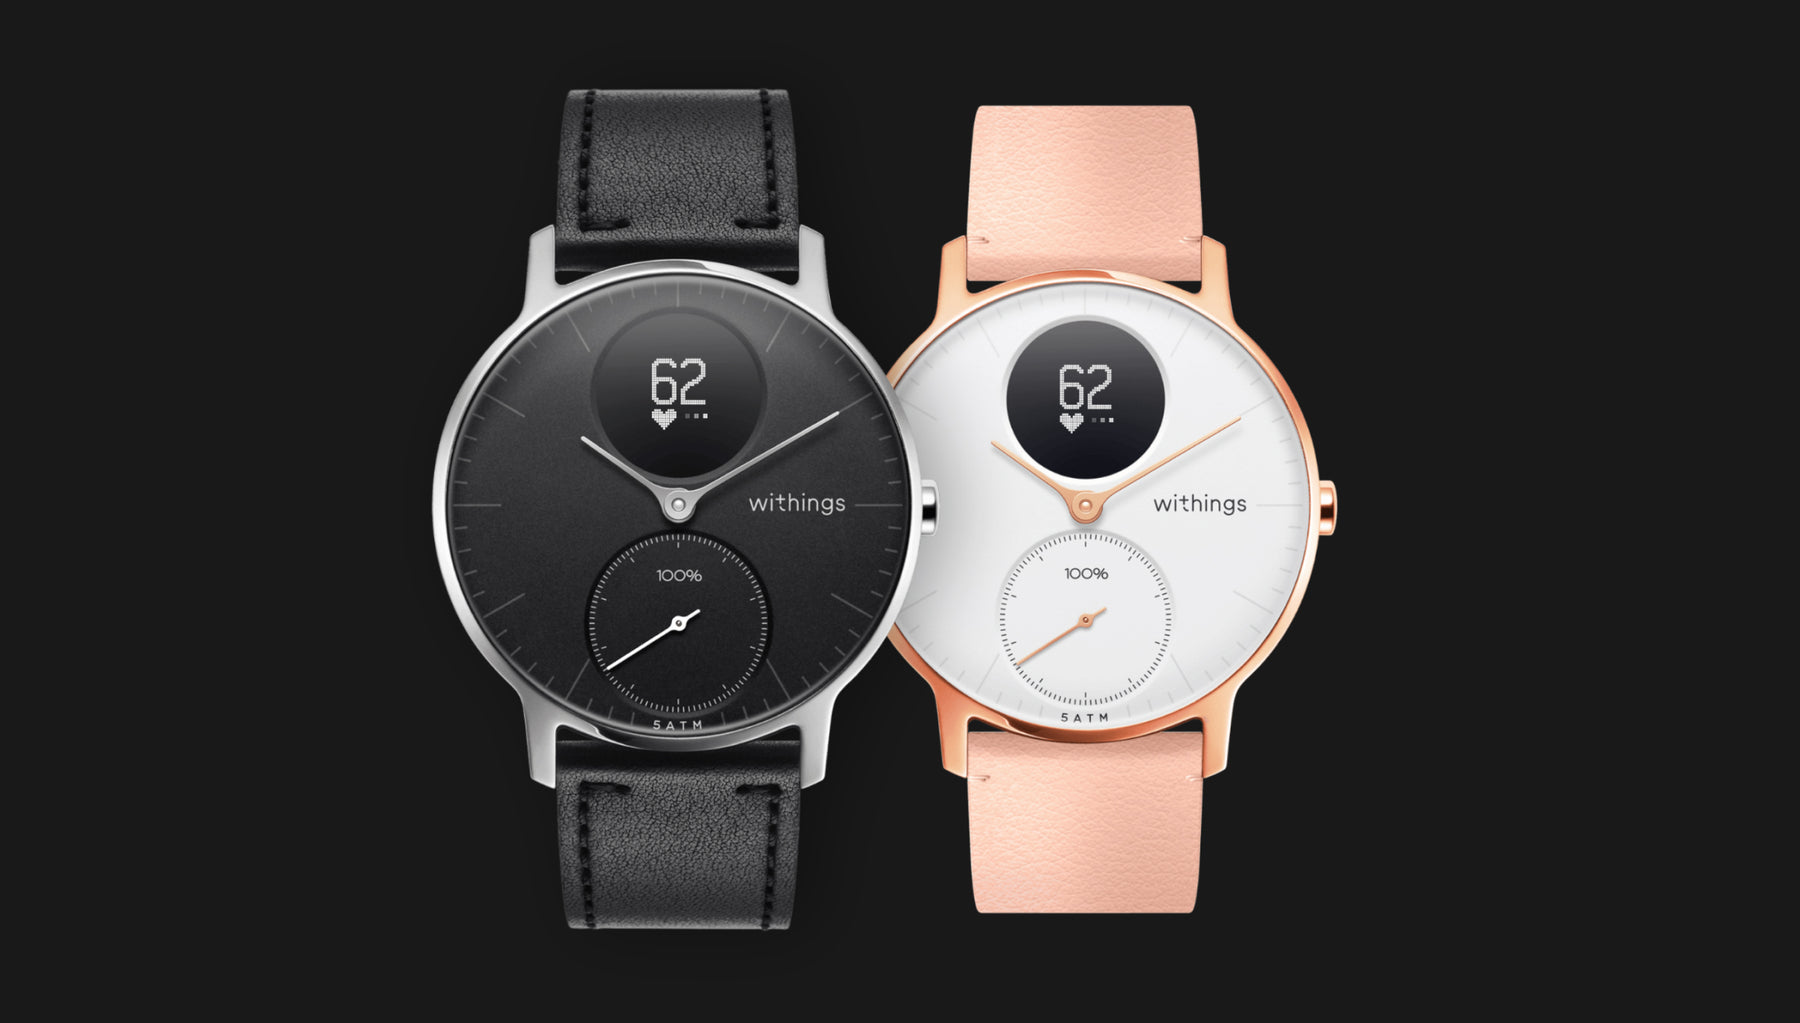 The best smartwatches on the market